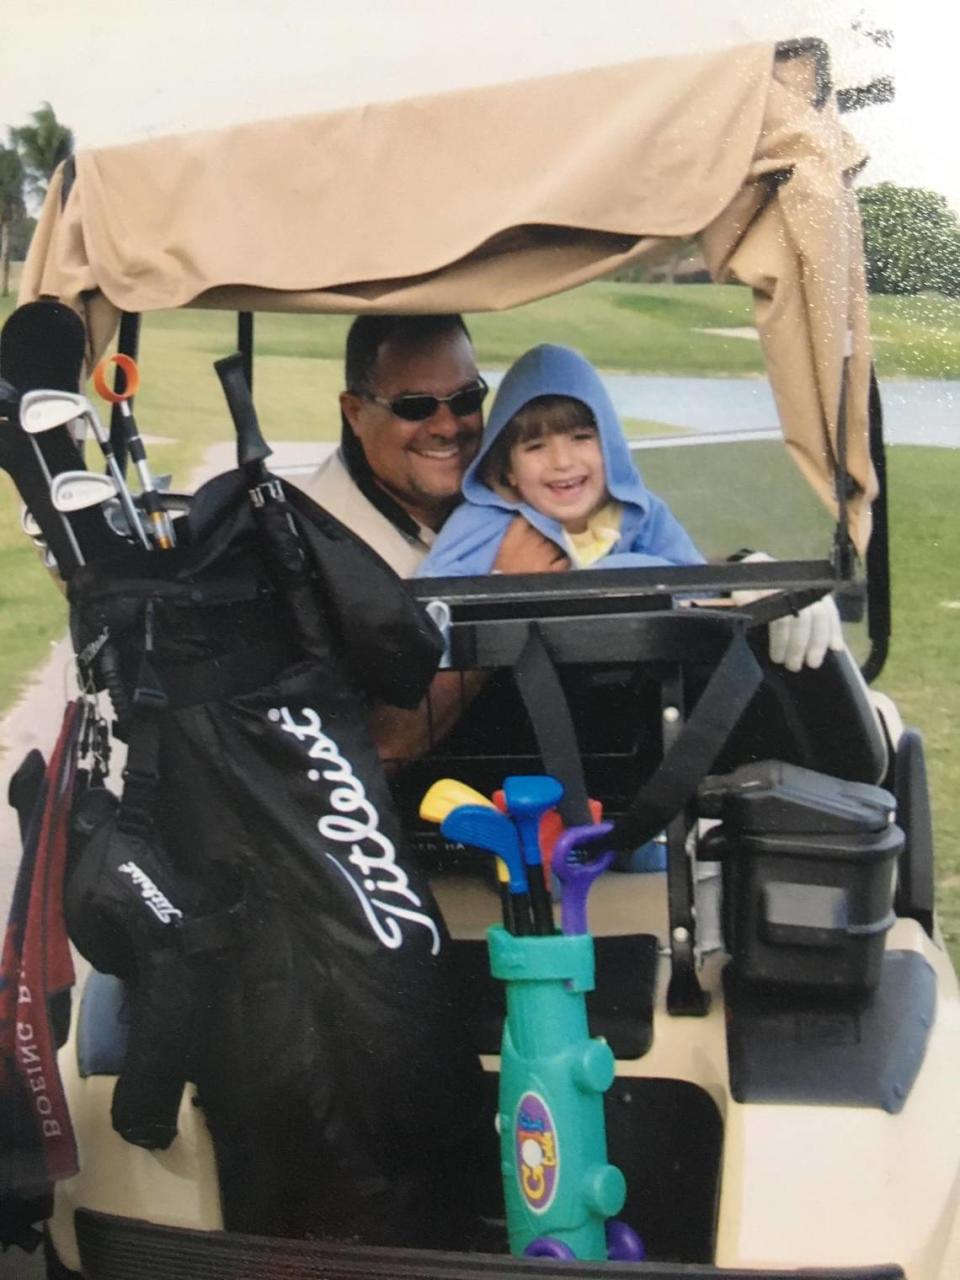 George Moussa and daughter Megan in a 2003 photo when they played golf together on the Calusa Country Club course behind their house. The course closed in 2011.